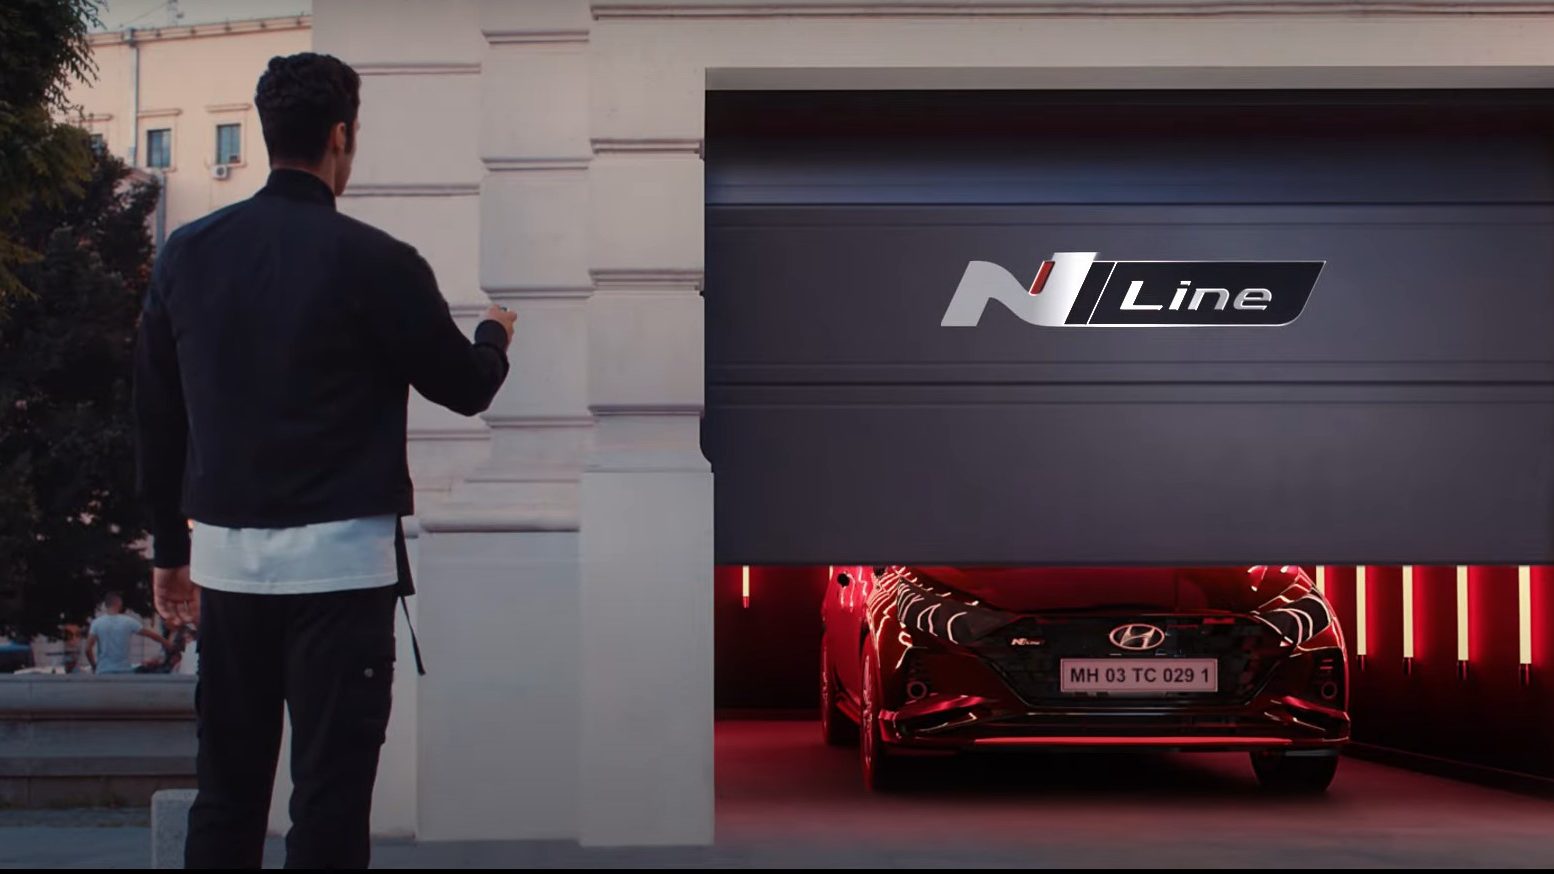 Hyundai India's teaser video all but confirms the first model to be launched will be the i20 N Line. Image: Hyundai